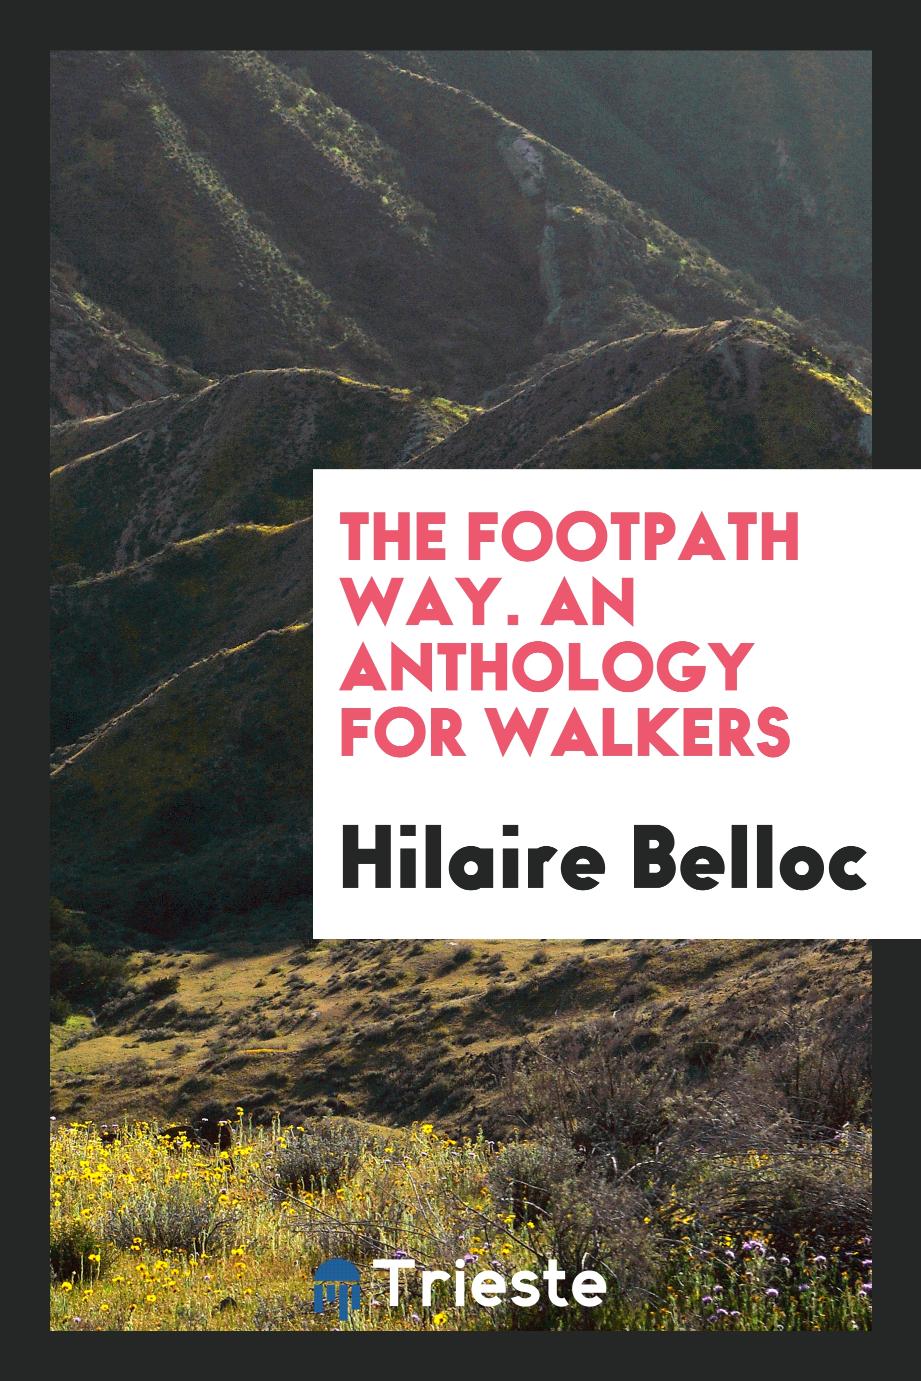 The footpath way. An anthology for walkers